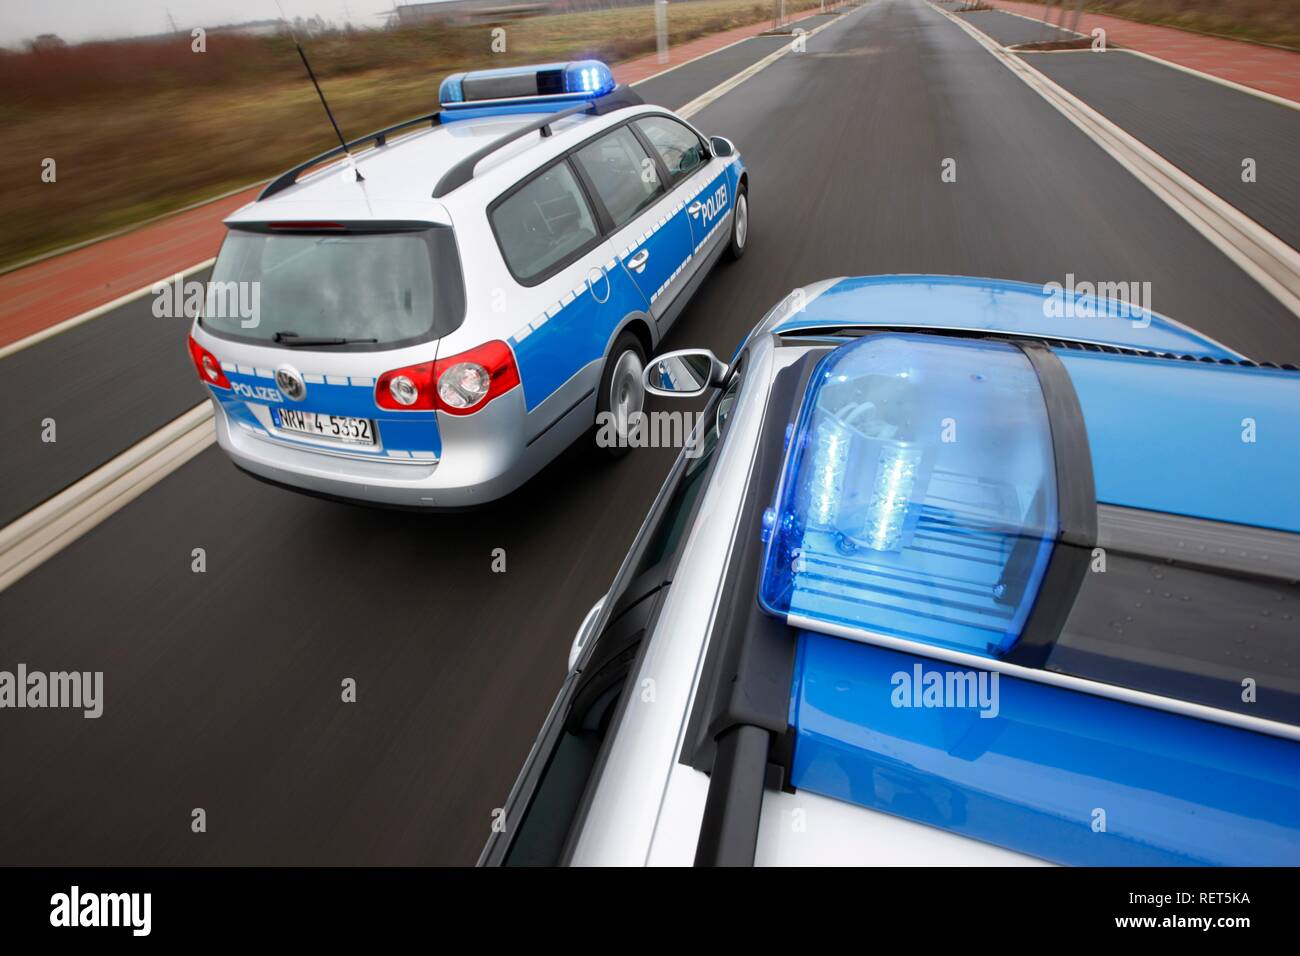 German police cars, blue design, in action with flashing sirens Stock Photo